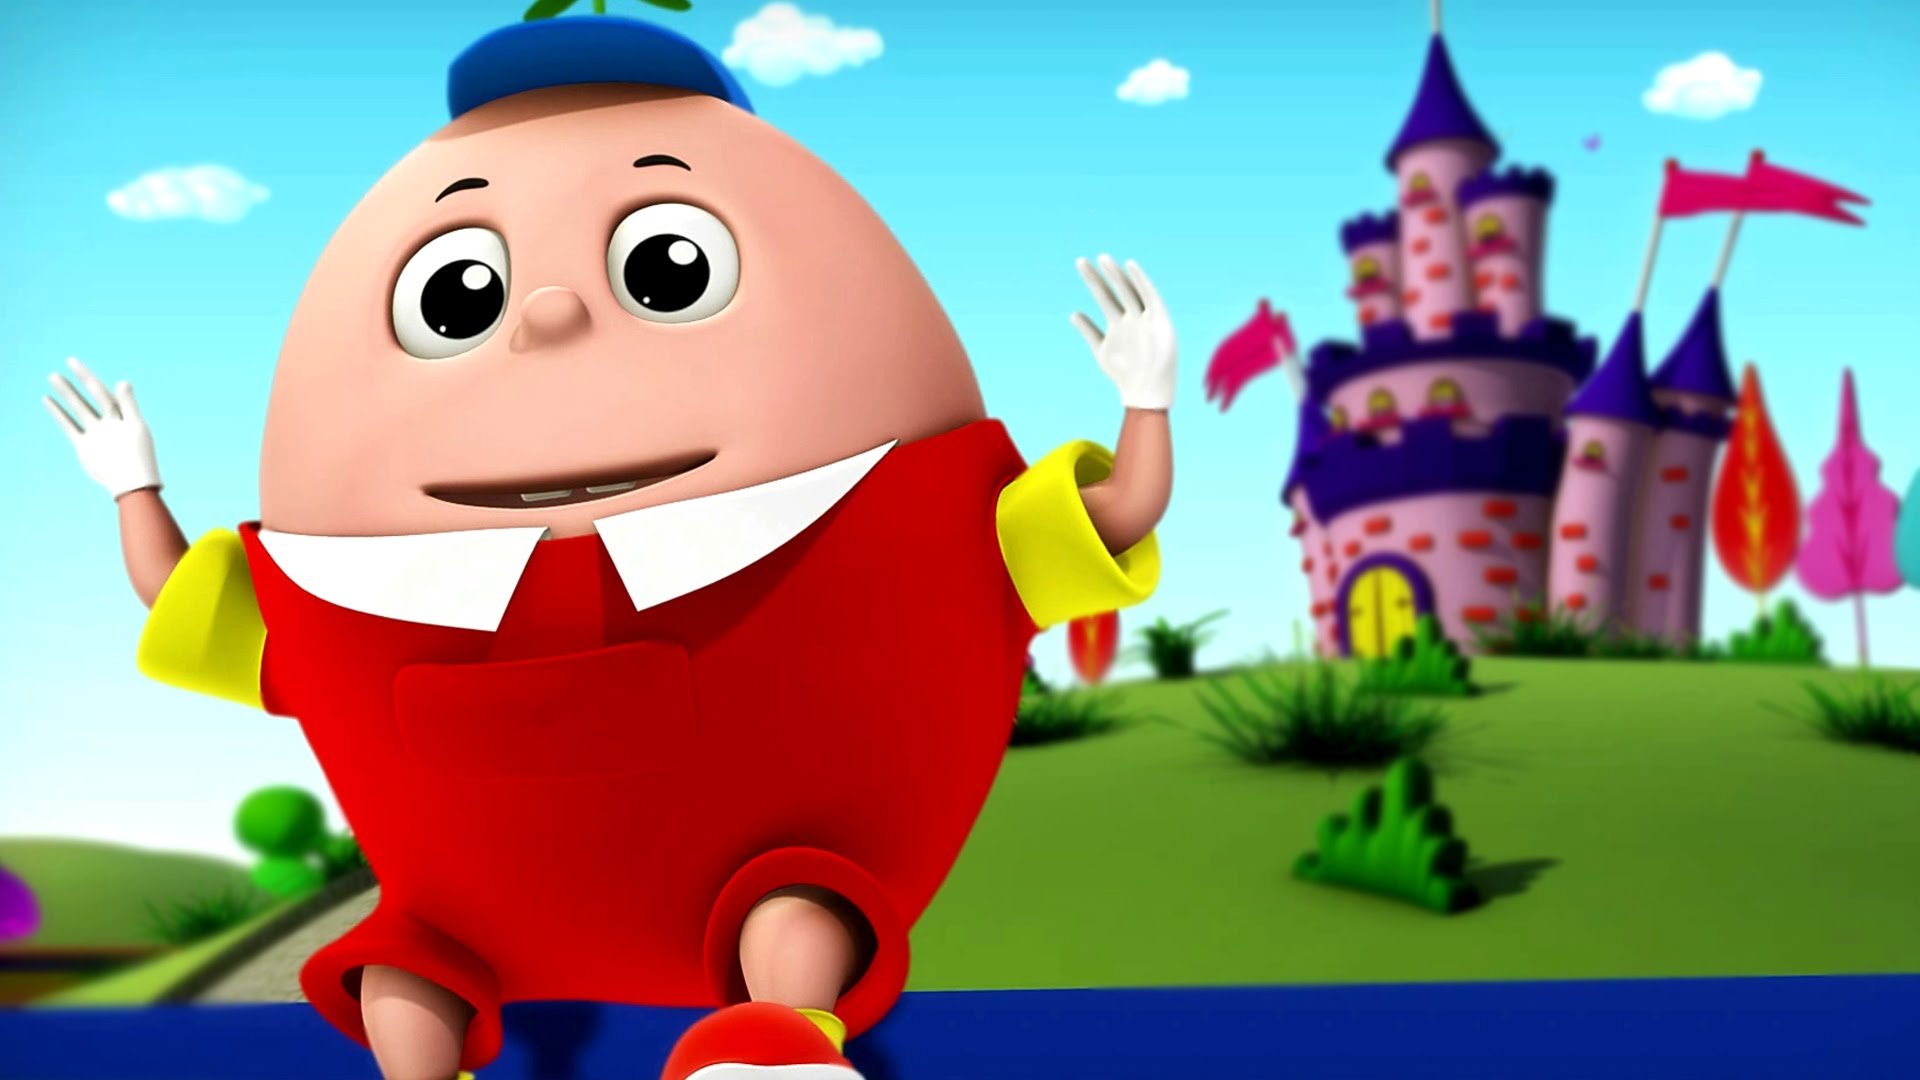 Humpty Dumpty | Nursery Rhymes For Kids And Childrens | 3d Songs For ...